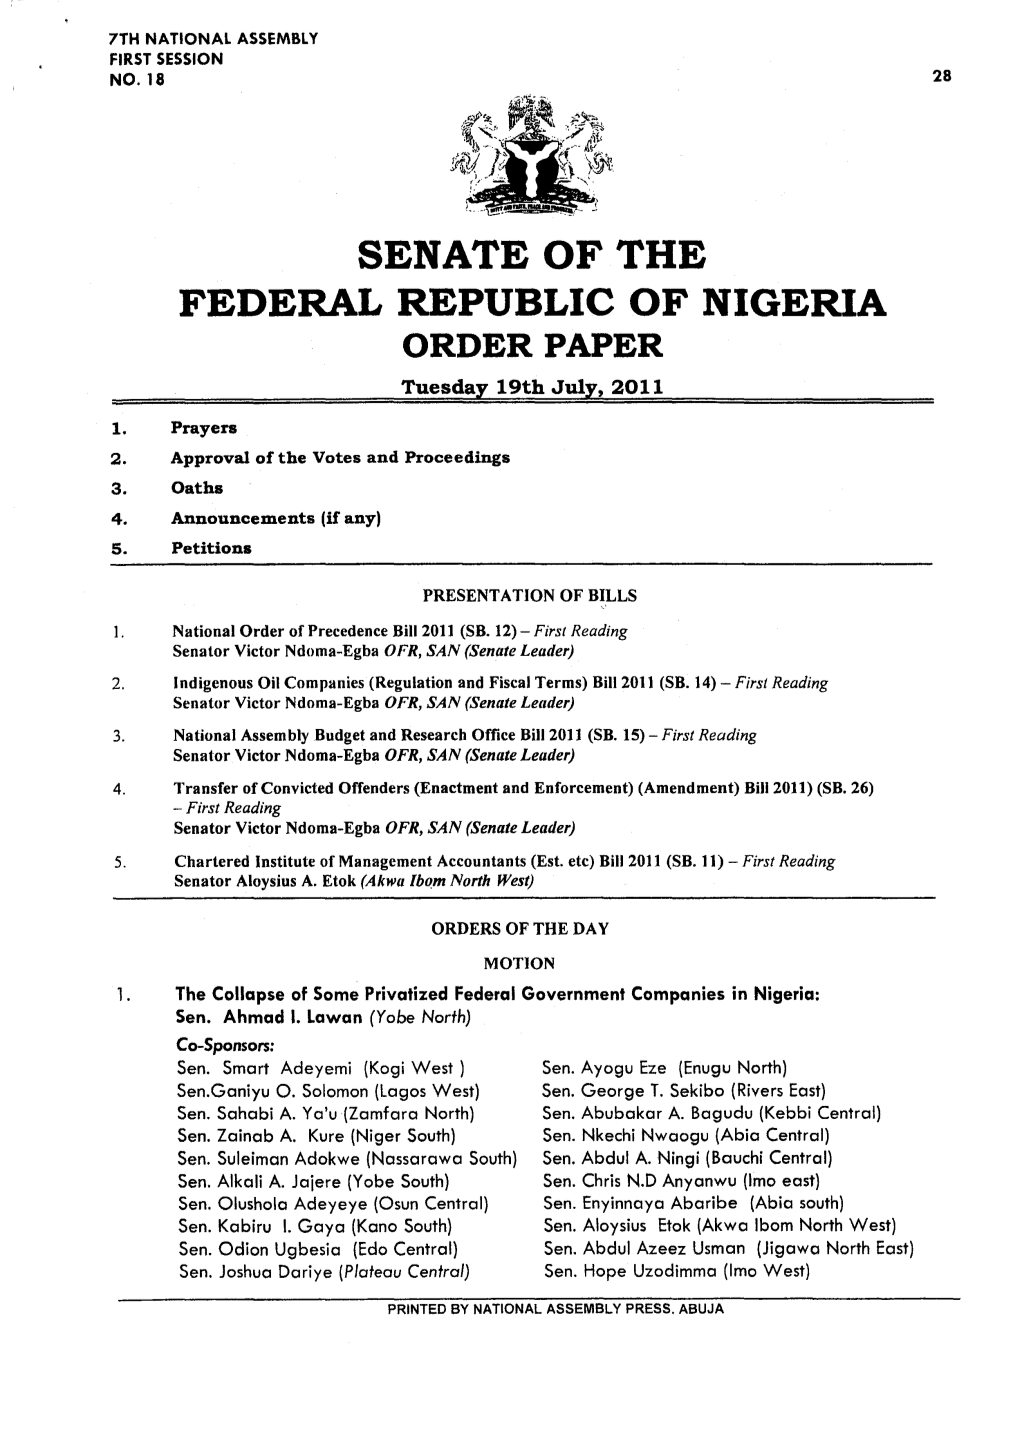 SENATE of the FEDERAL REPUBLIC of NIGERIA ORDER PAPER Tuesday 19Th July, 2011